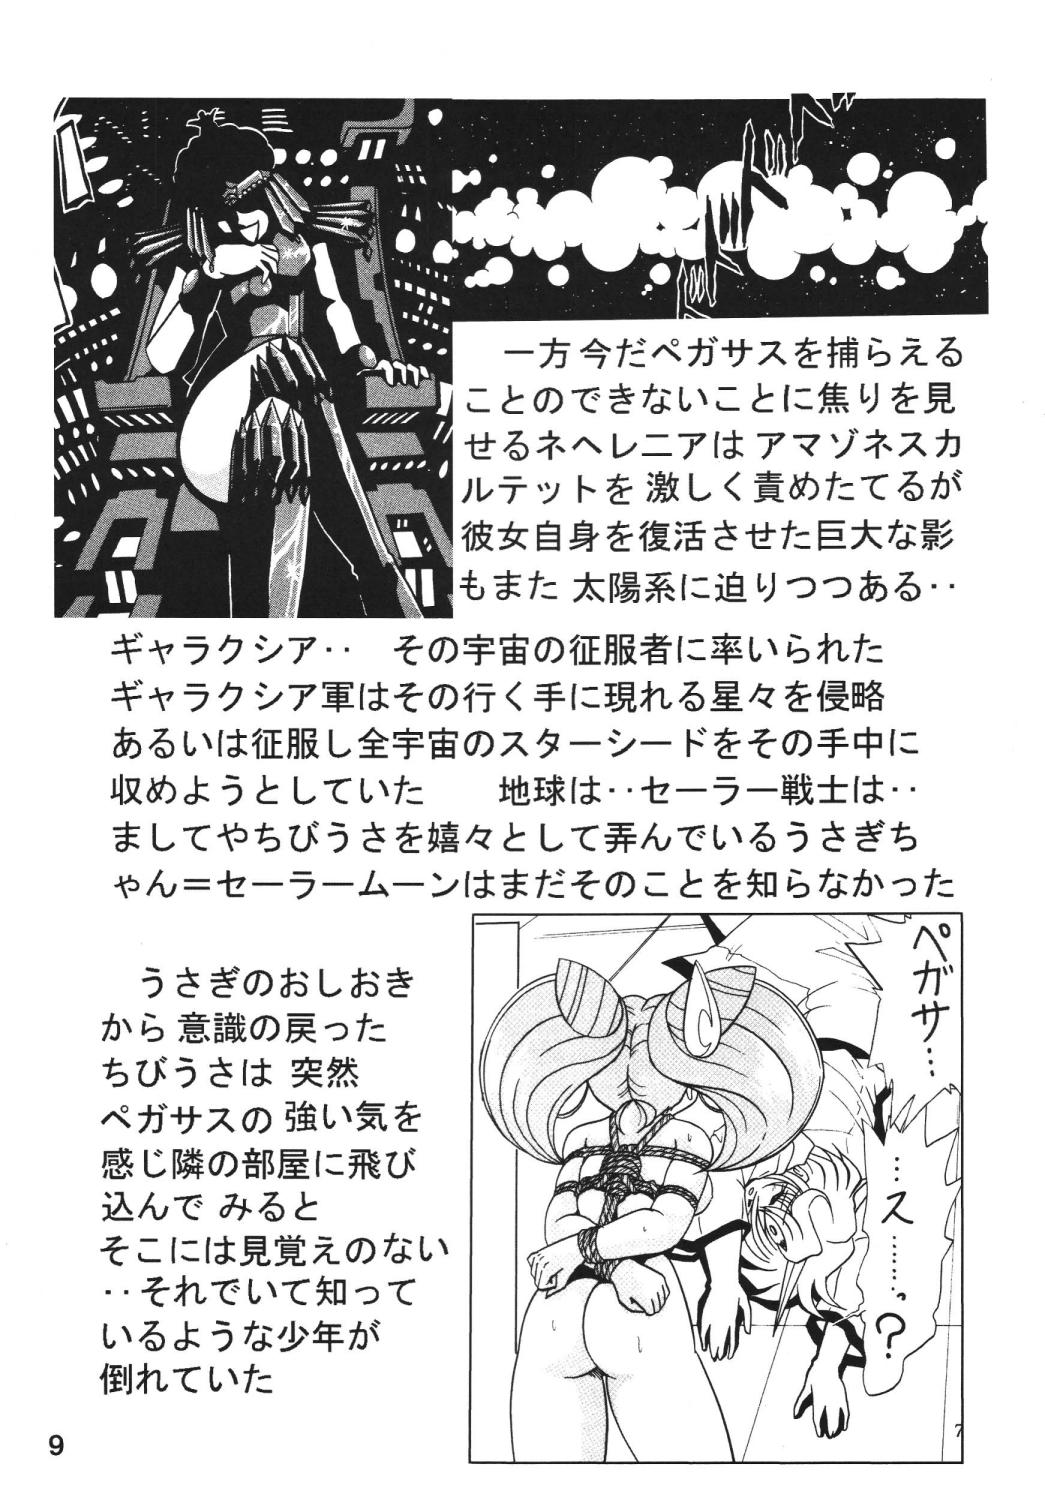 Stepbrother Silent Saturn SS vol. 7 - Sailor moon Italiano - Page 8